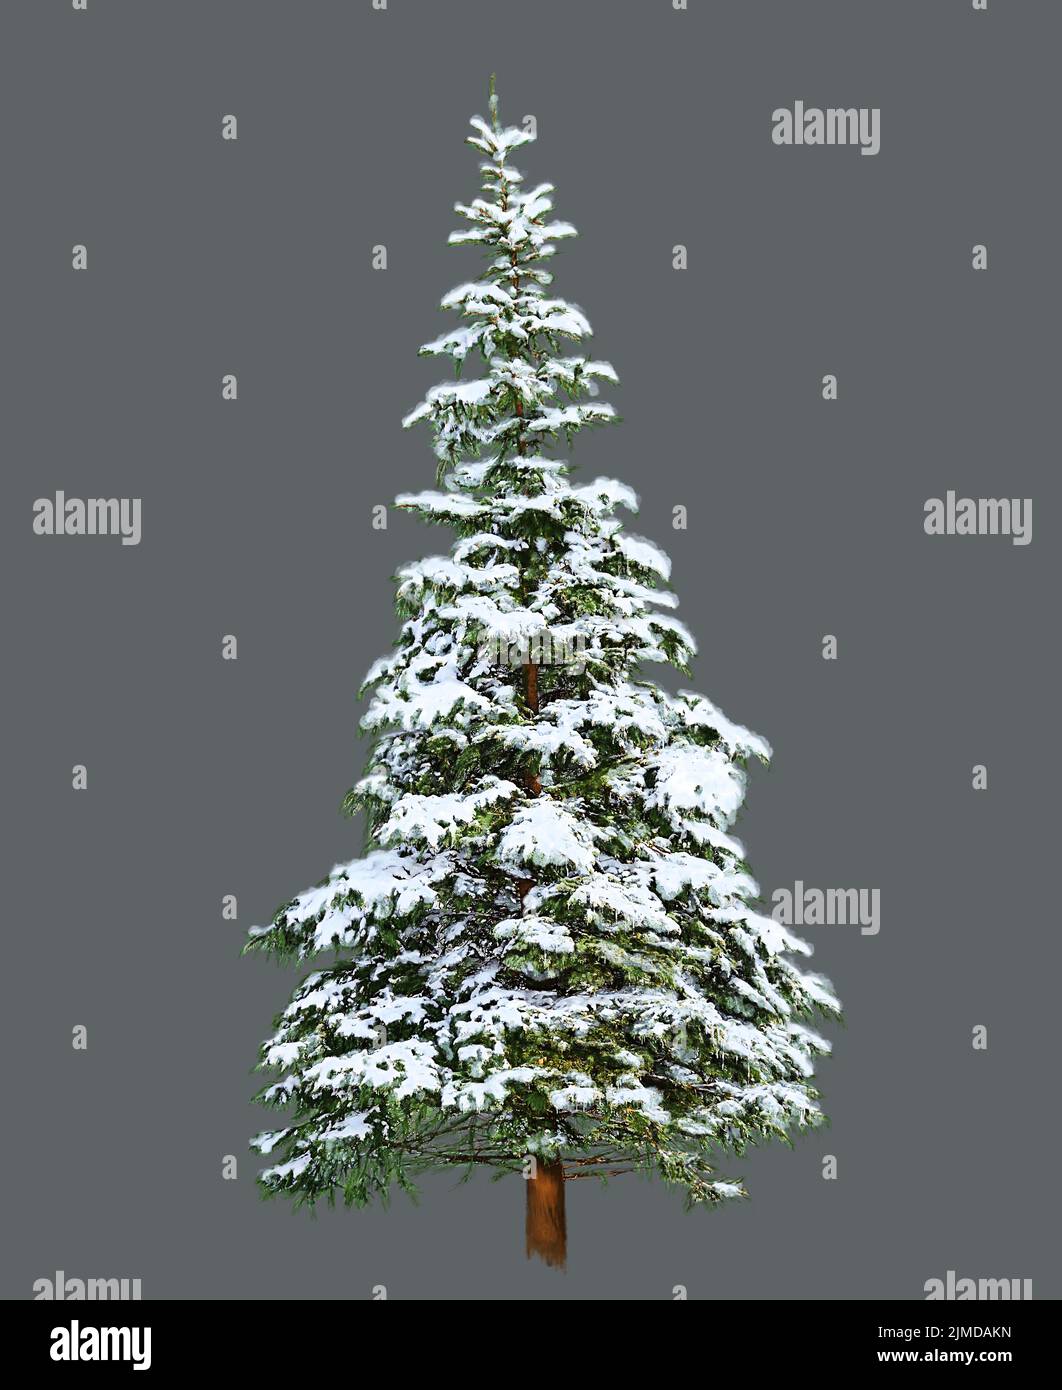 Pine Tree with Snow, Digital Painting on White background Stock Photo